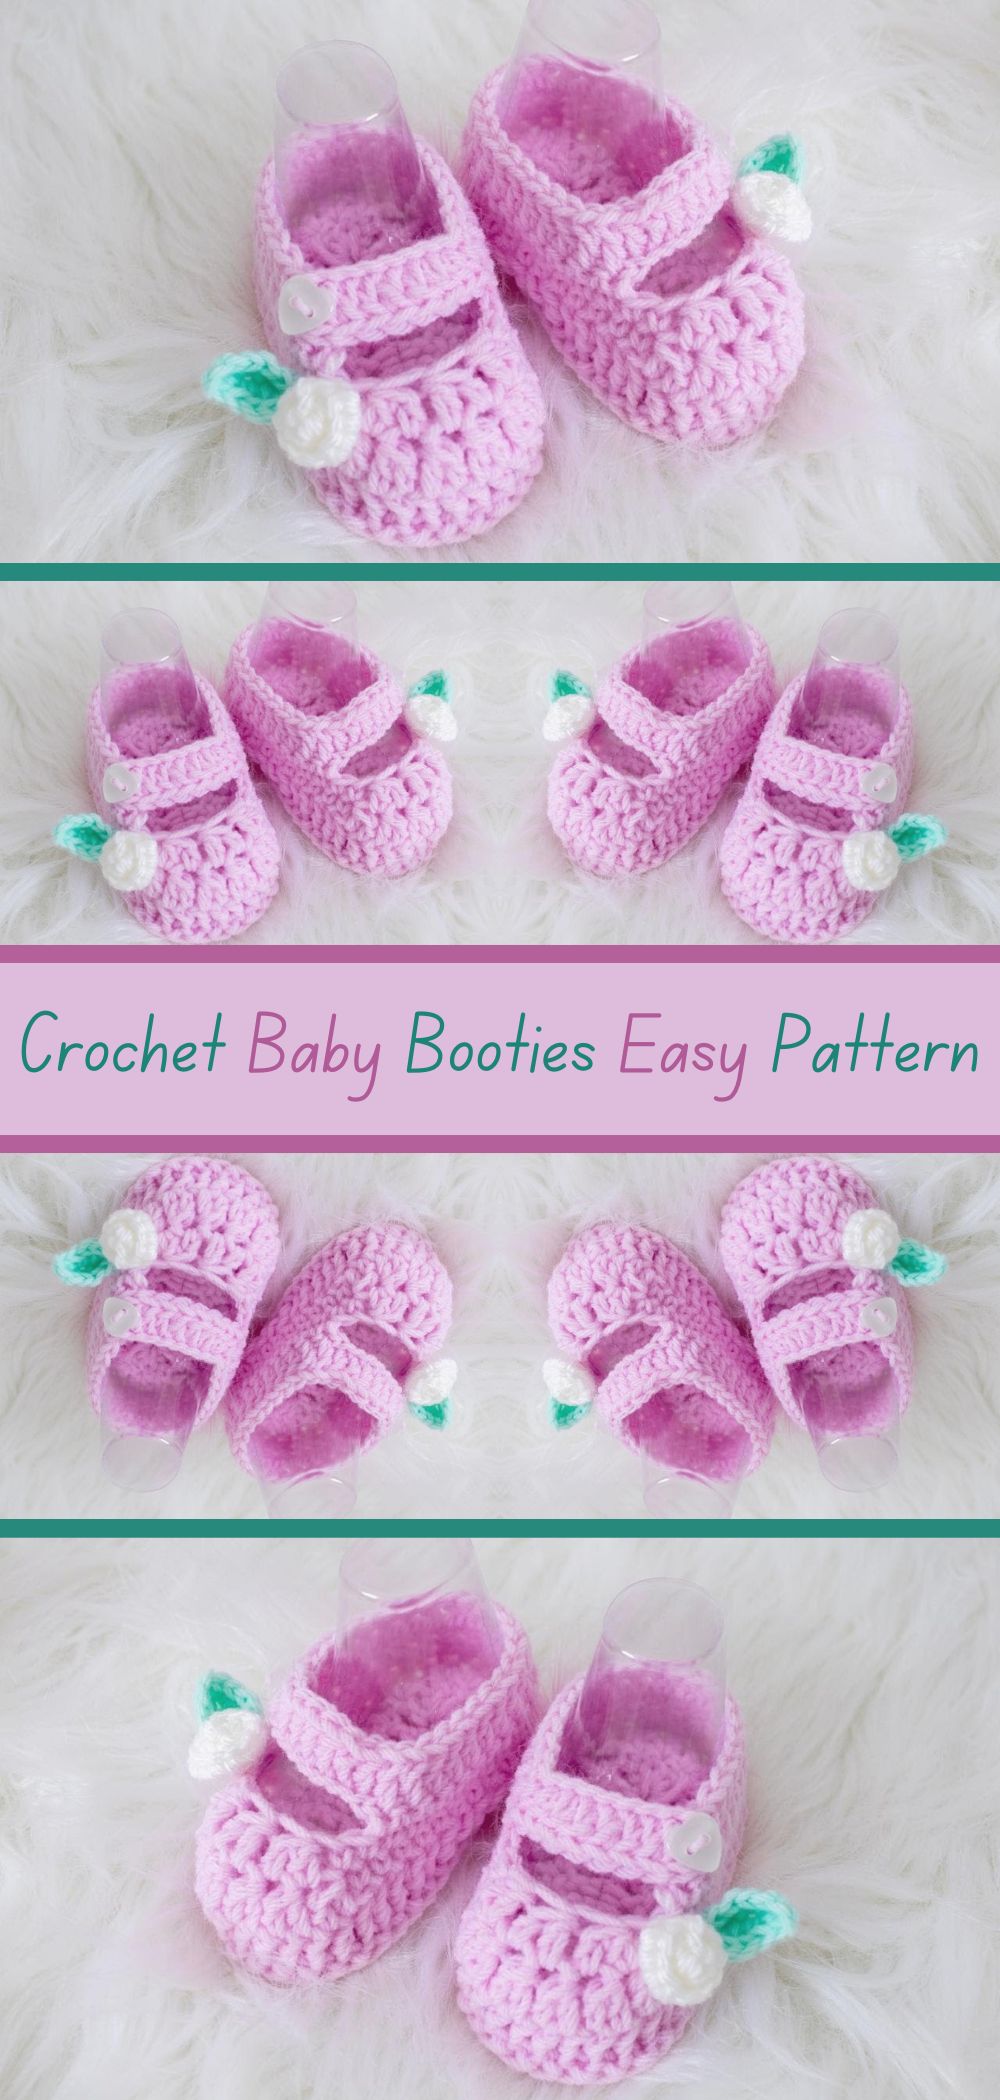 Easy Crochet Baby Booties Pattern - Craft cute and cozy baby booties with this easy-to-follow crochet pattern